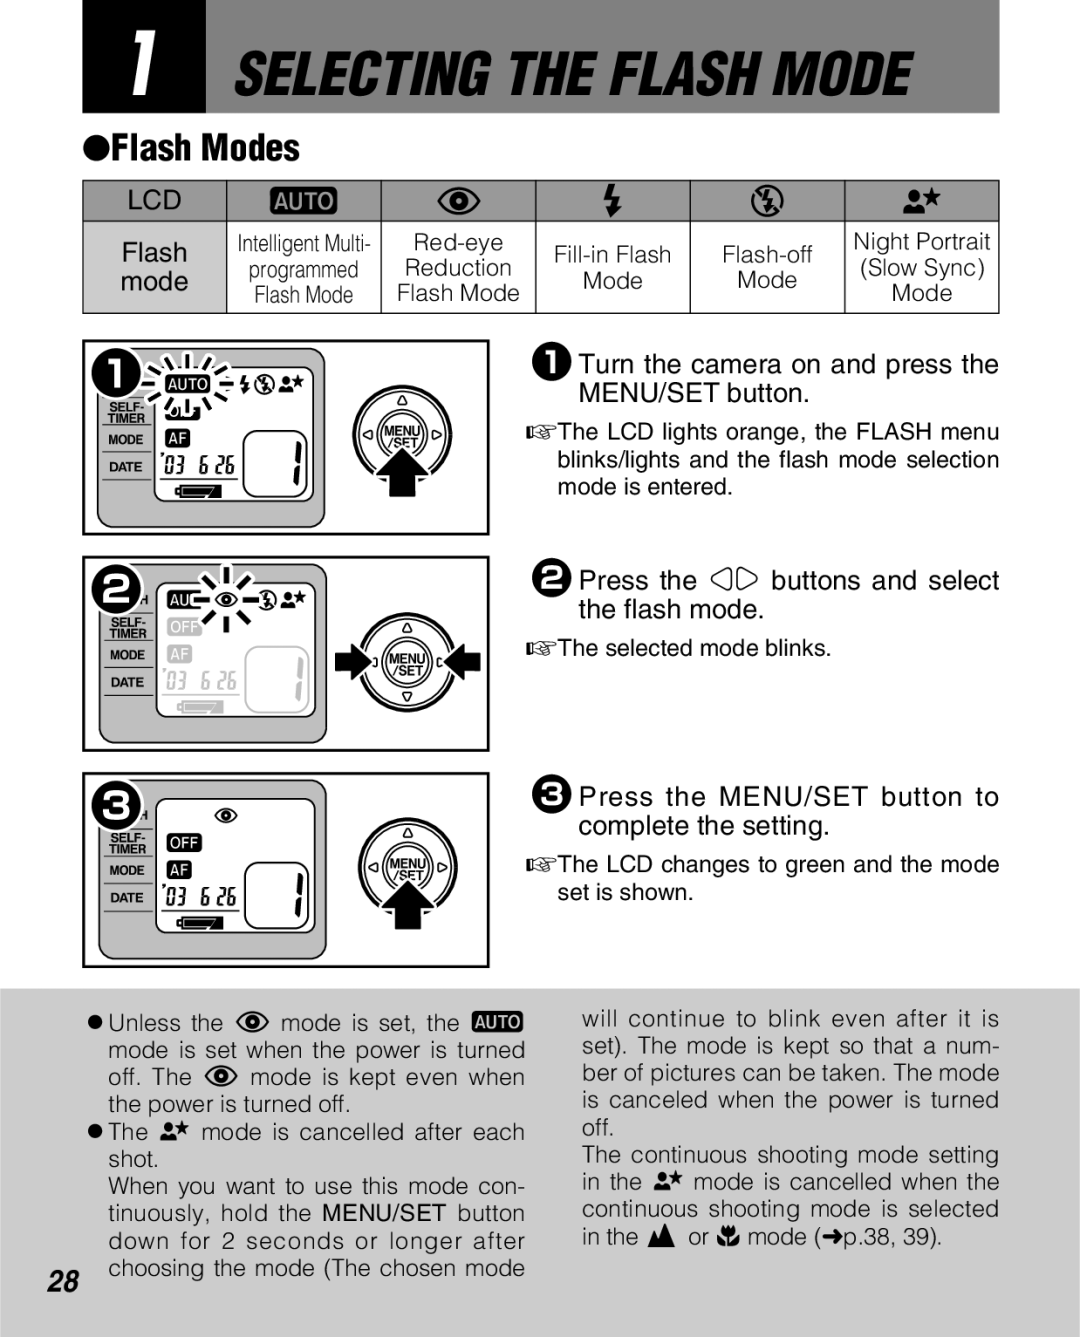 FujiFilm Zoom Date 160ez owner manual Selecting The Flash Mode, Flash Modes 